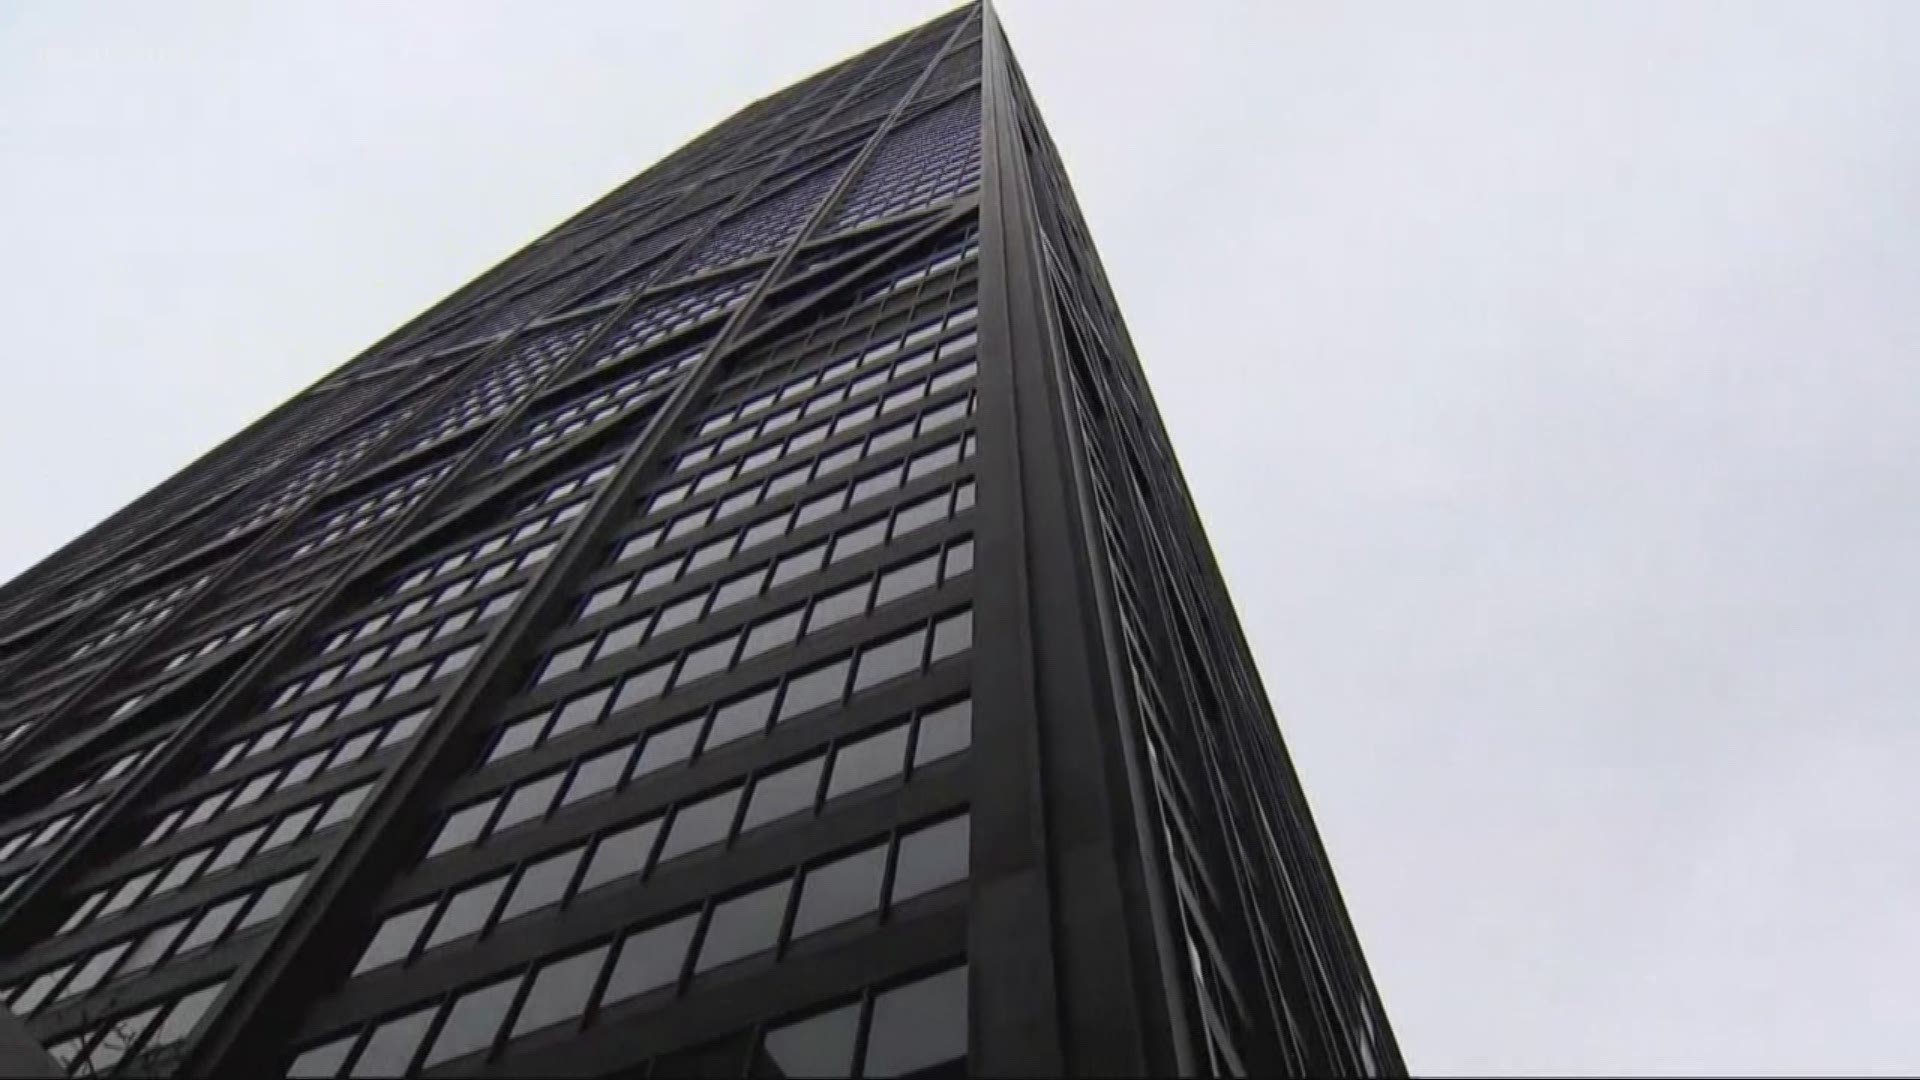 Fire officials said they've had to save more than 400 people from elevators in the past year.